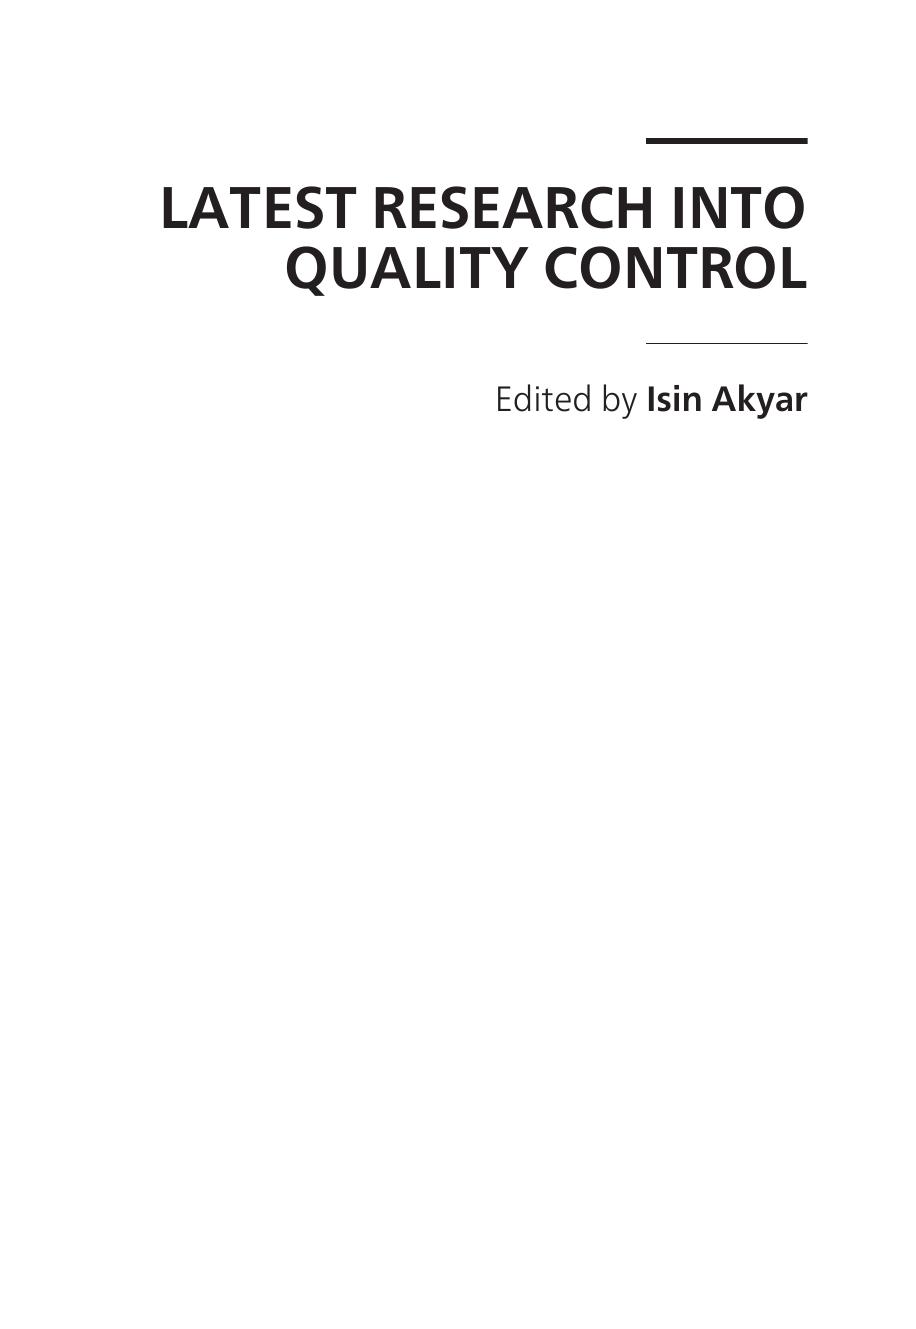 Latest Research into Quality Control 2012.pdf